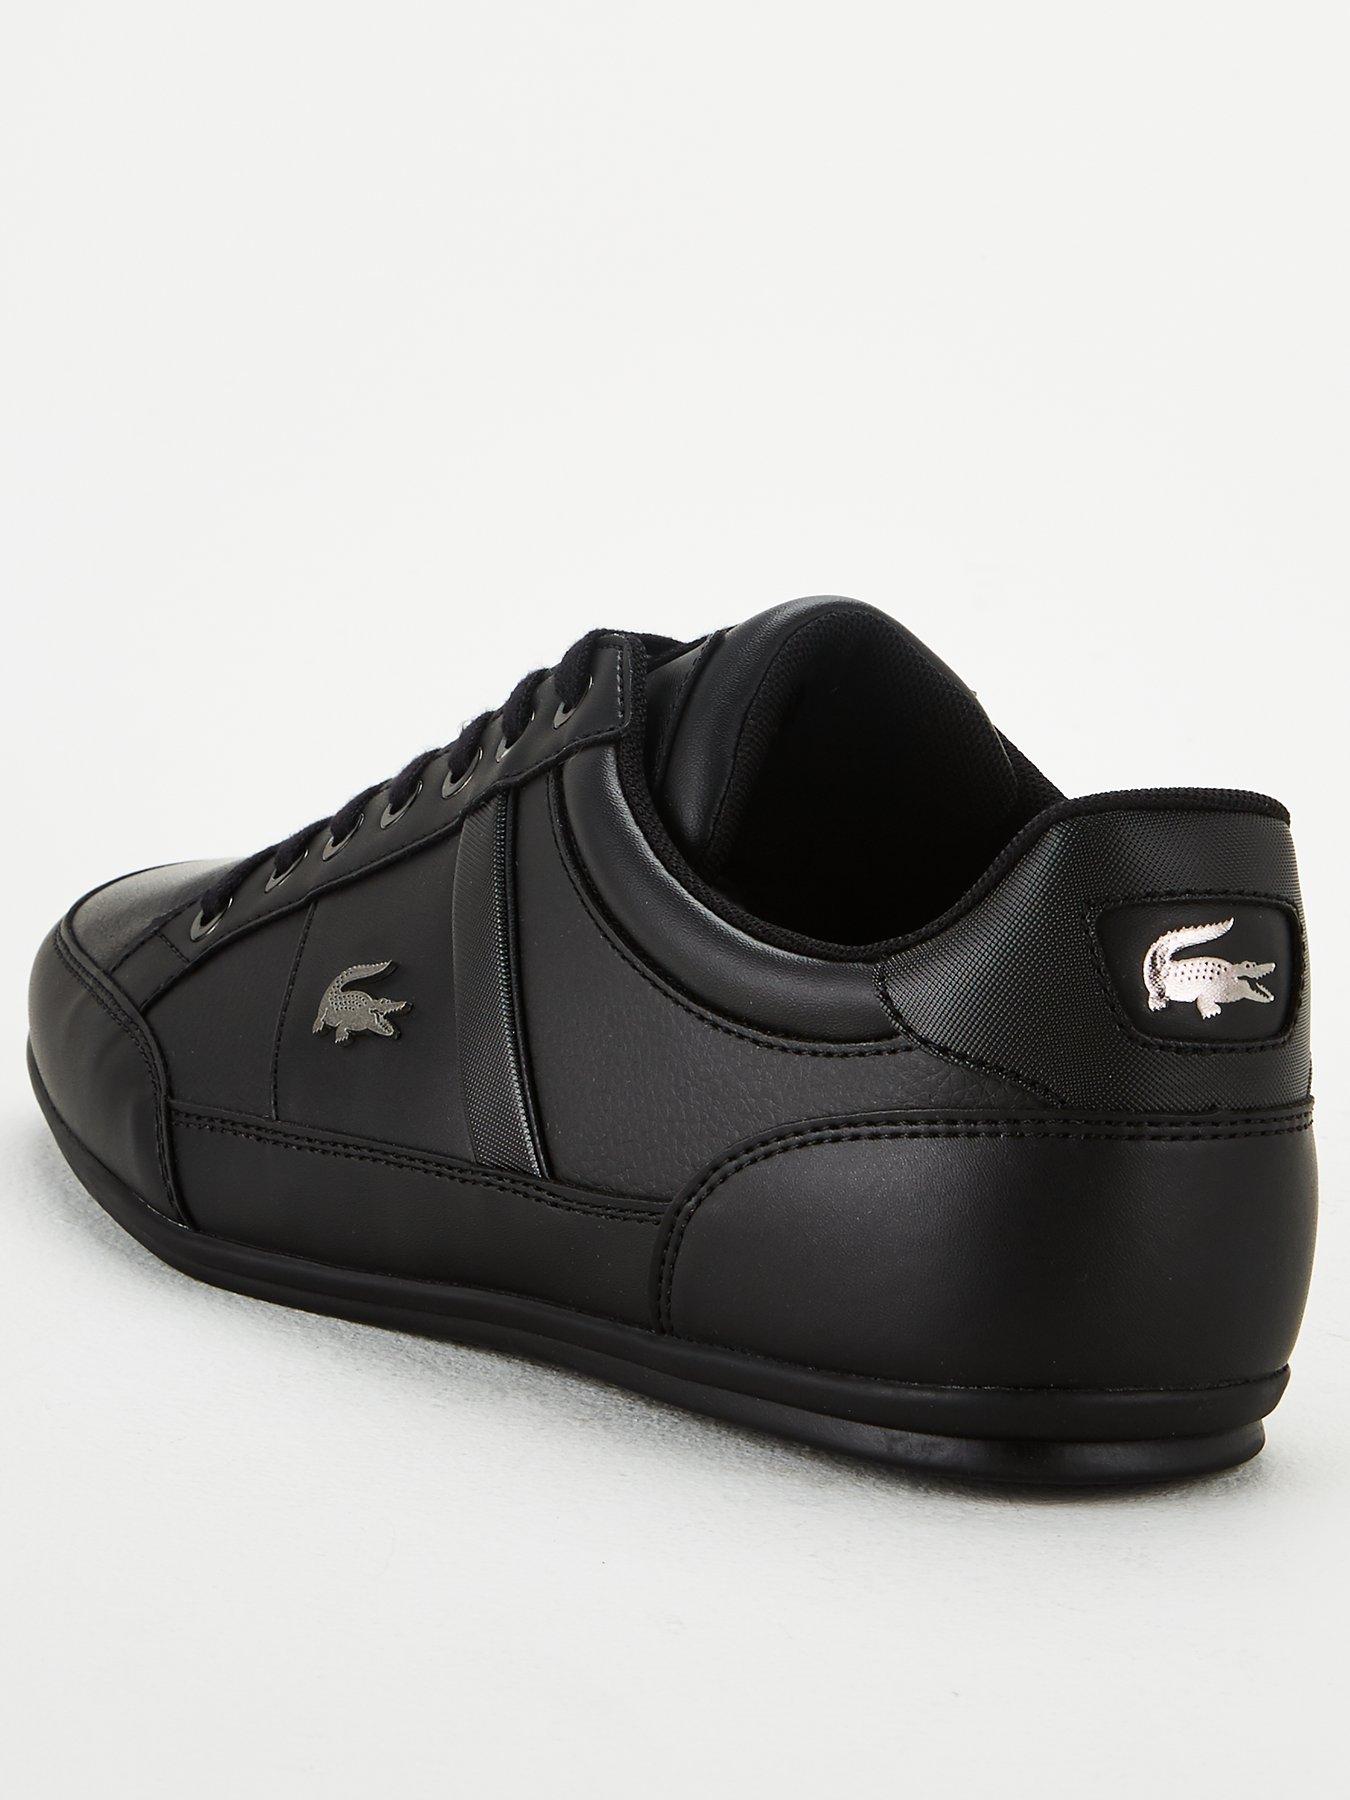 lacoste brown trainers mens